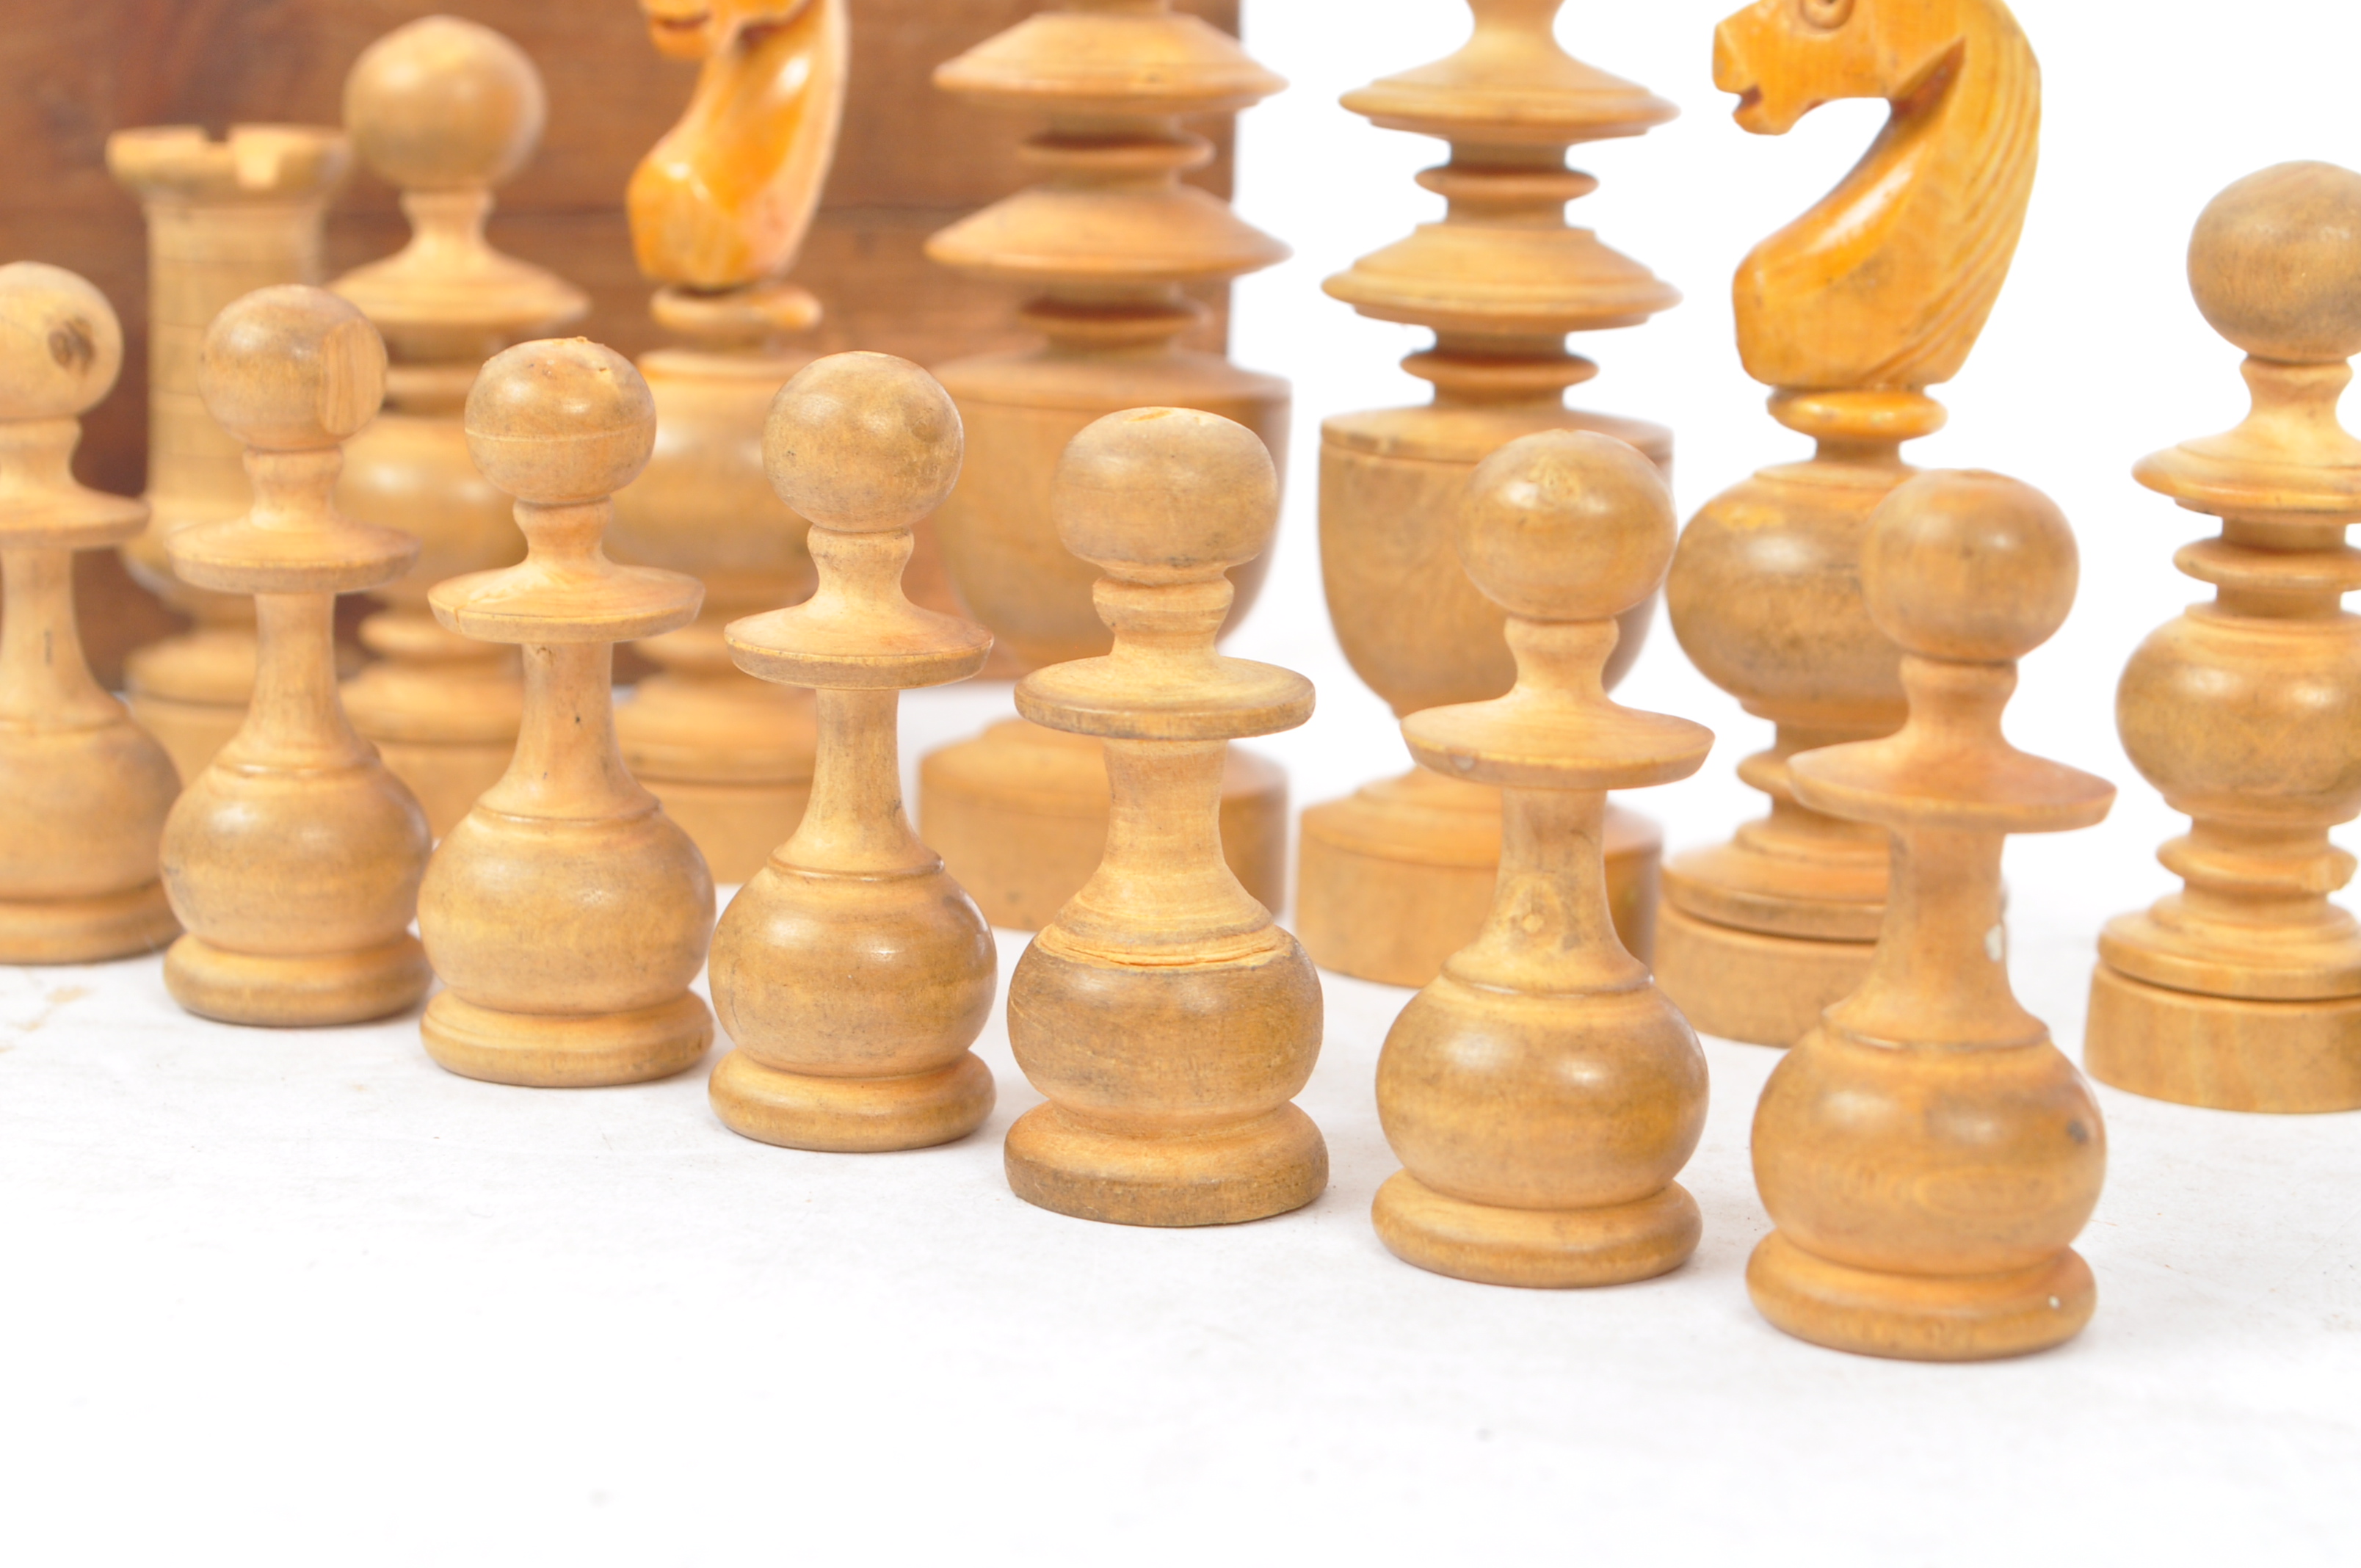 EARLY 20TH CENTURY TURNED WOODEN CHESS SET - Image 4 of 7